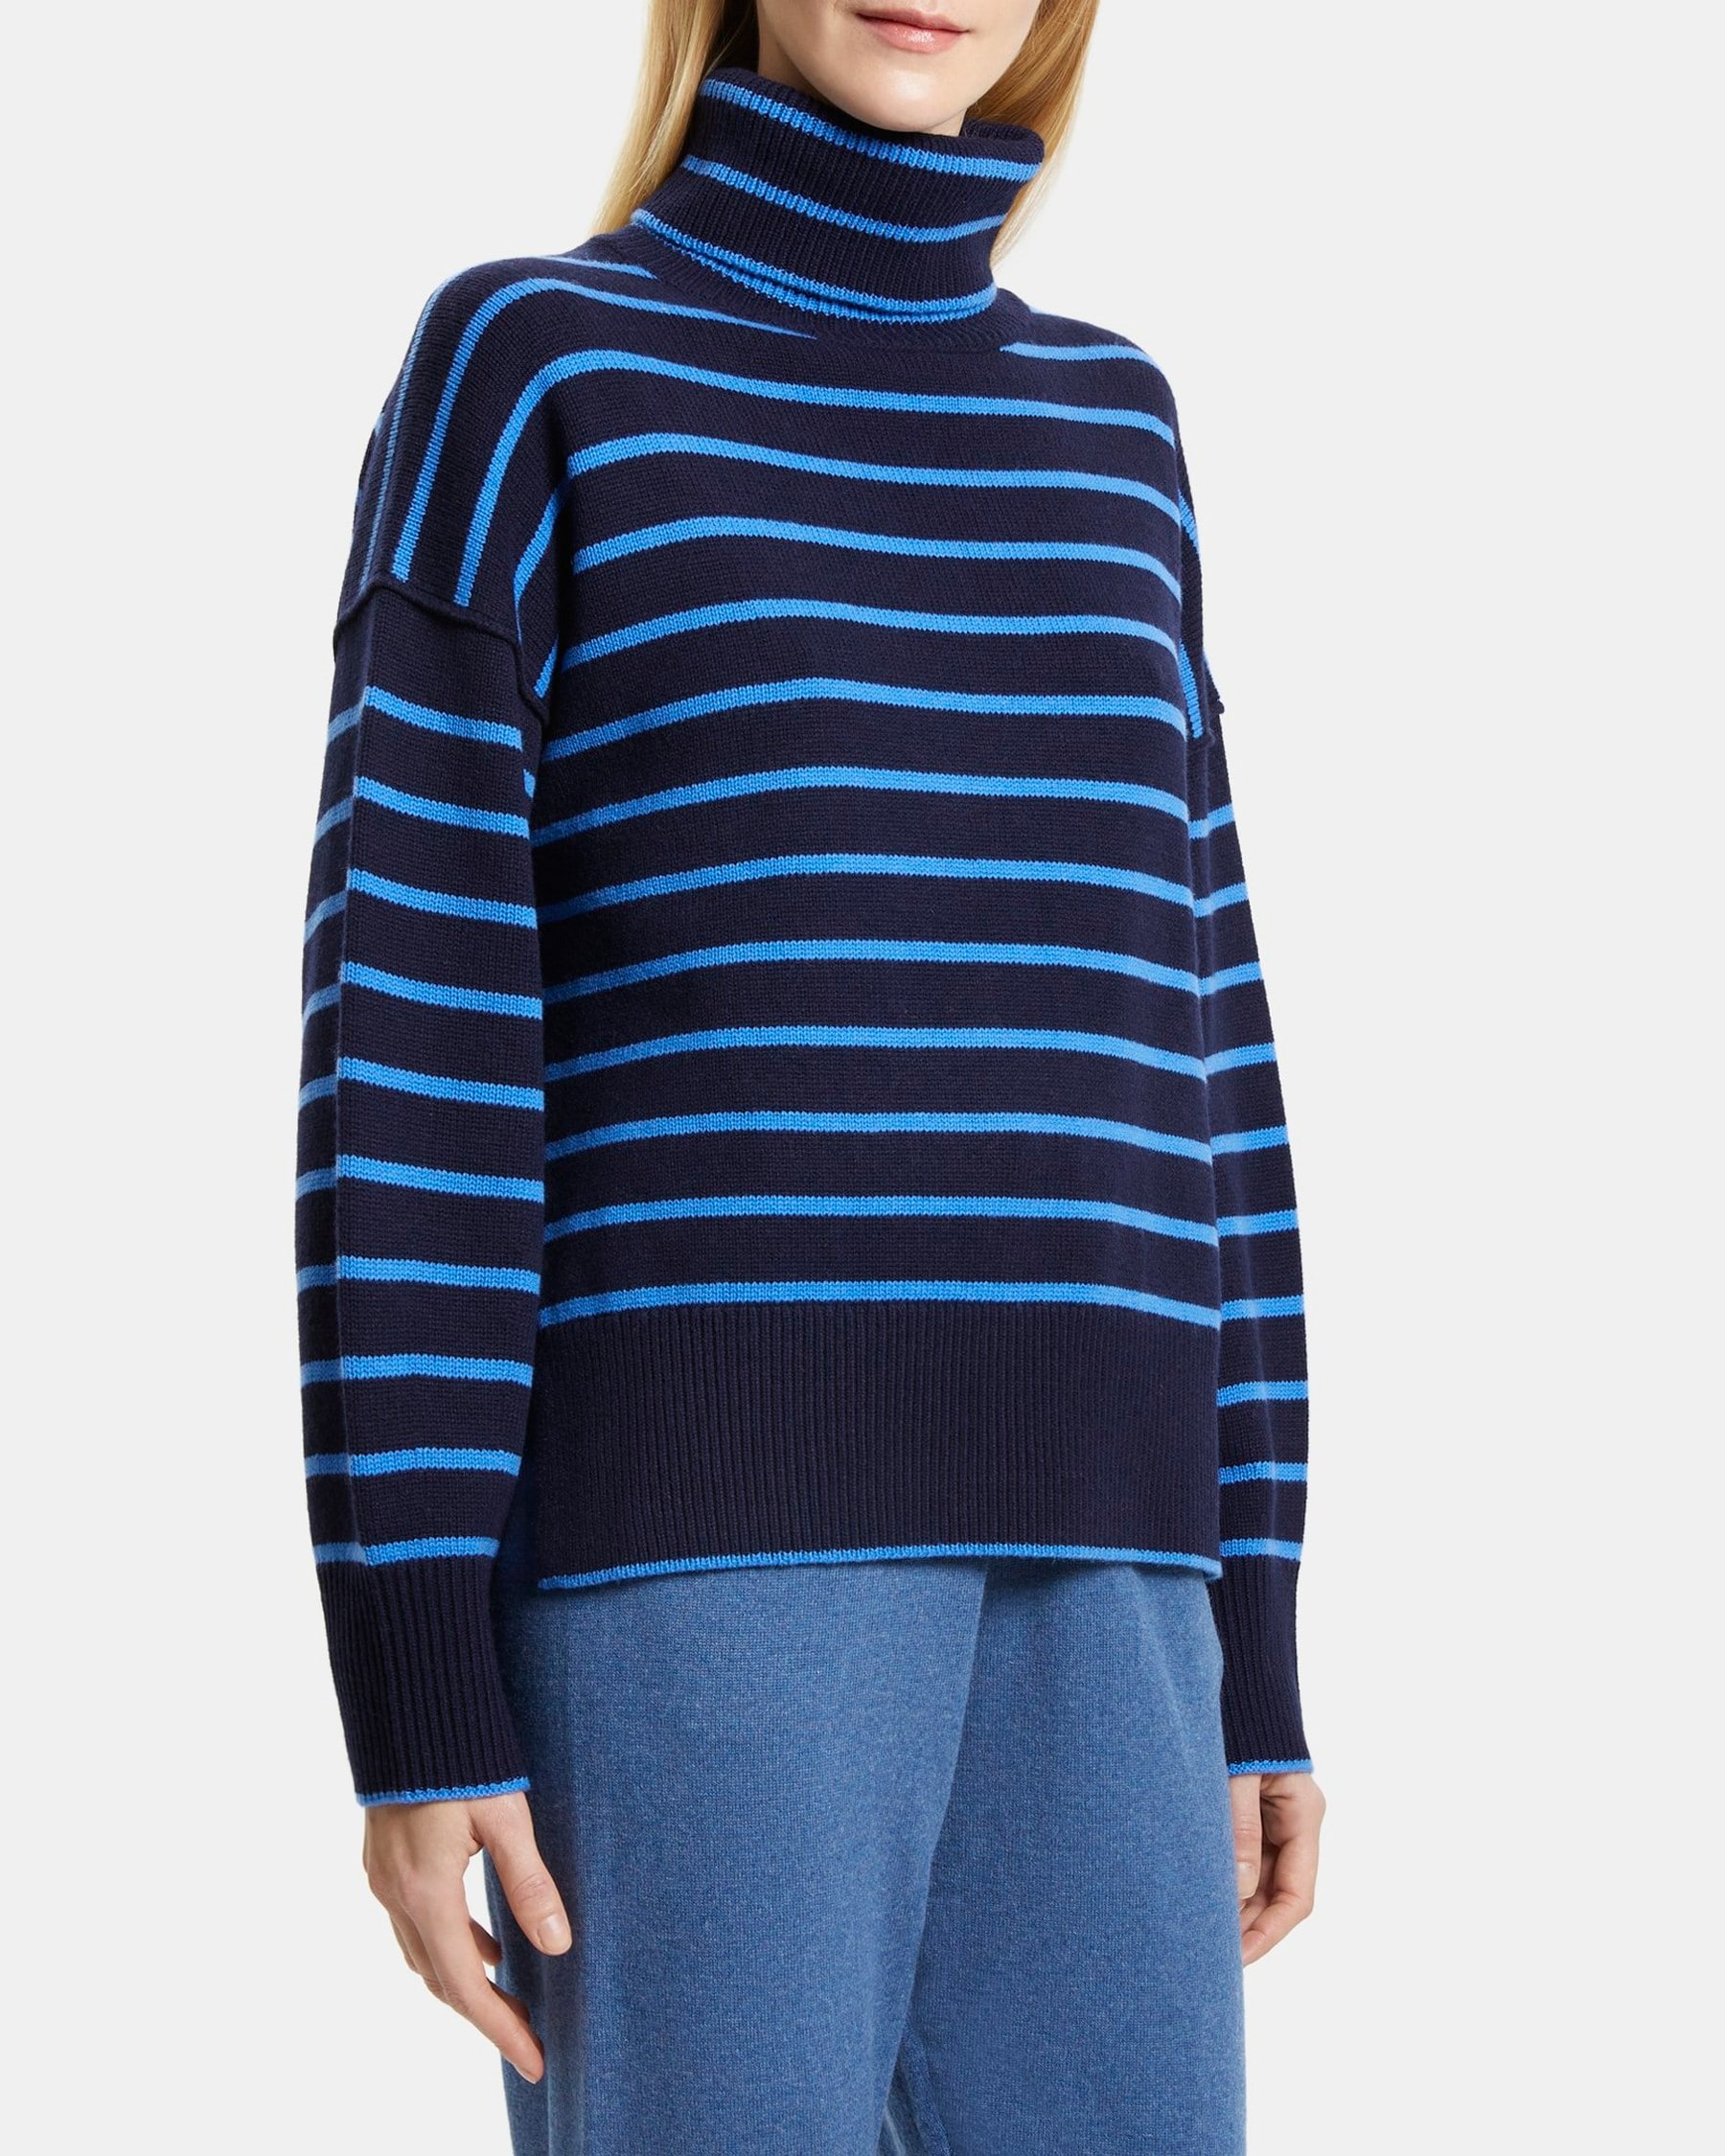 Striped Turtleneck in Wool-Cashmere